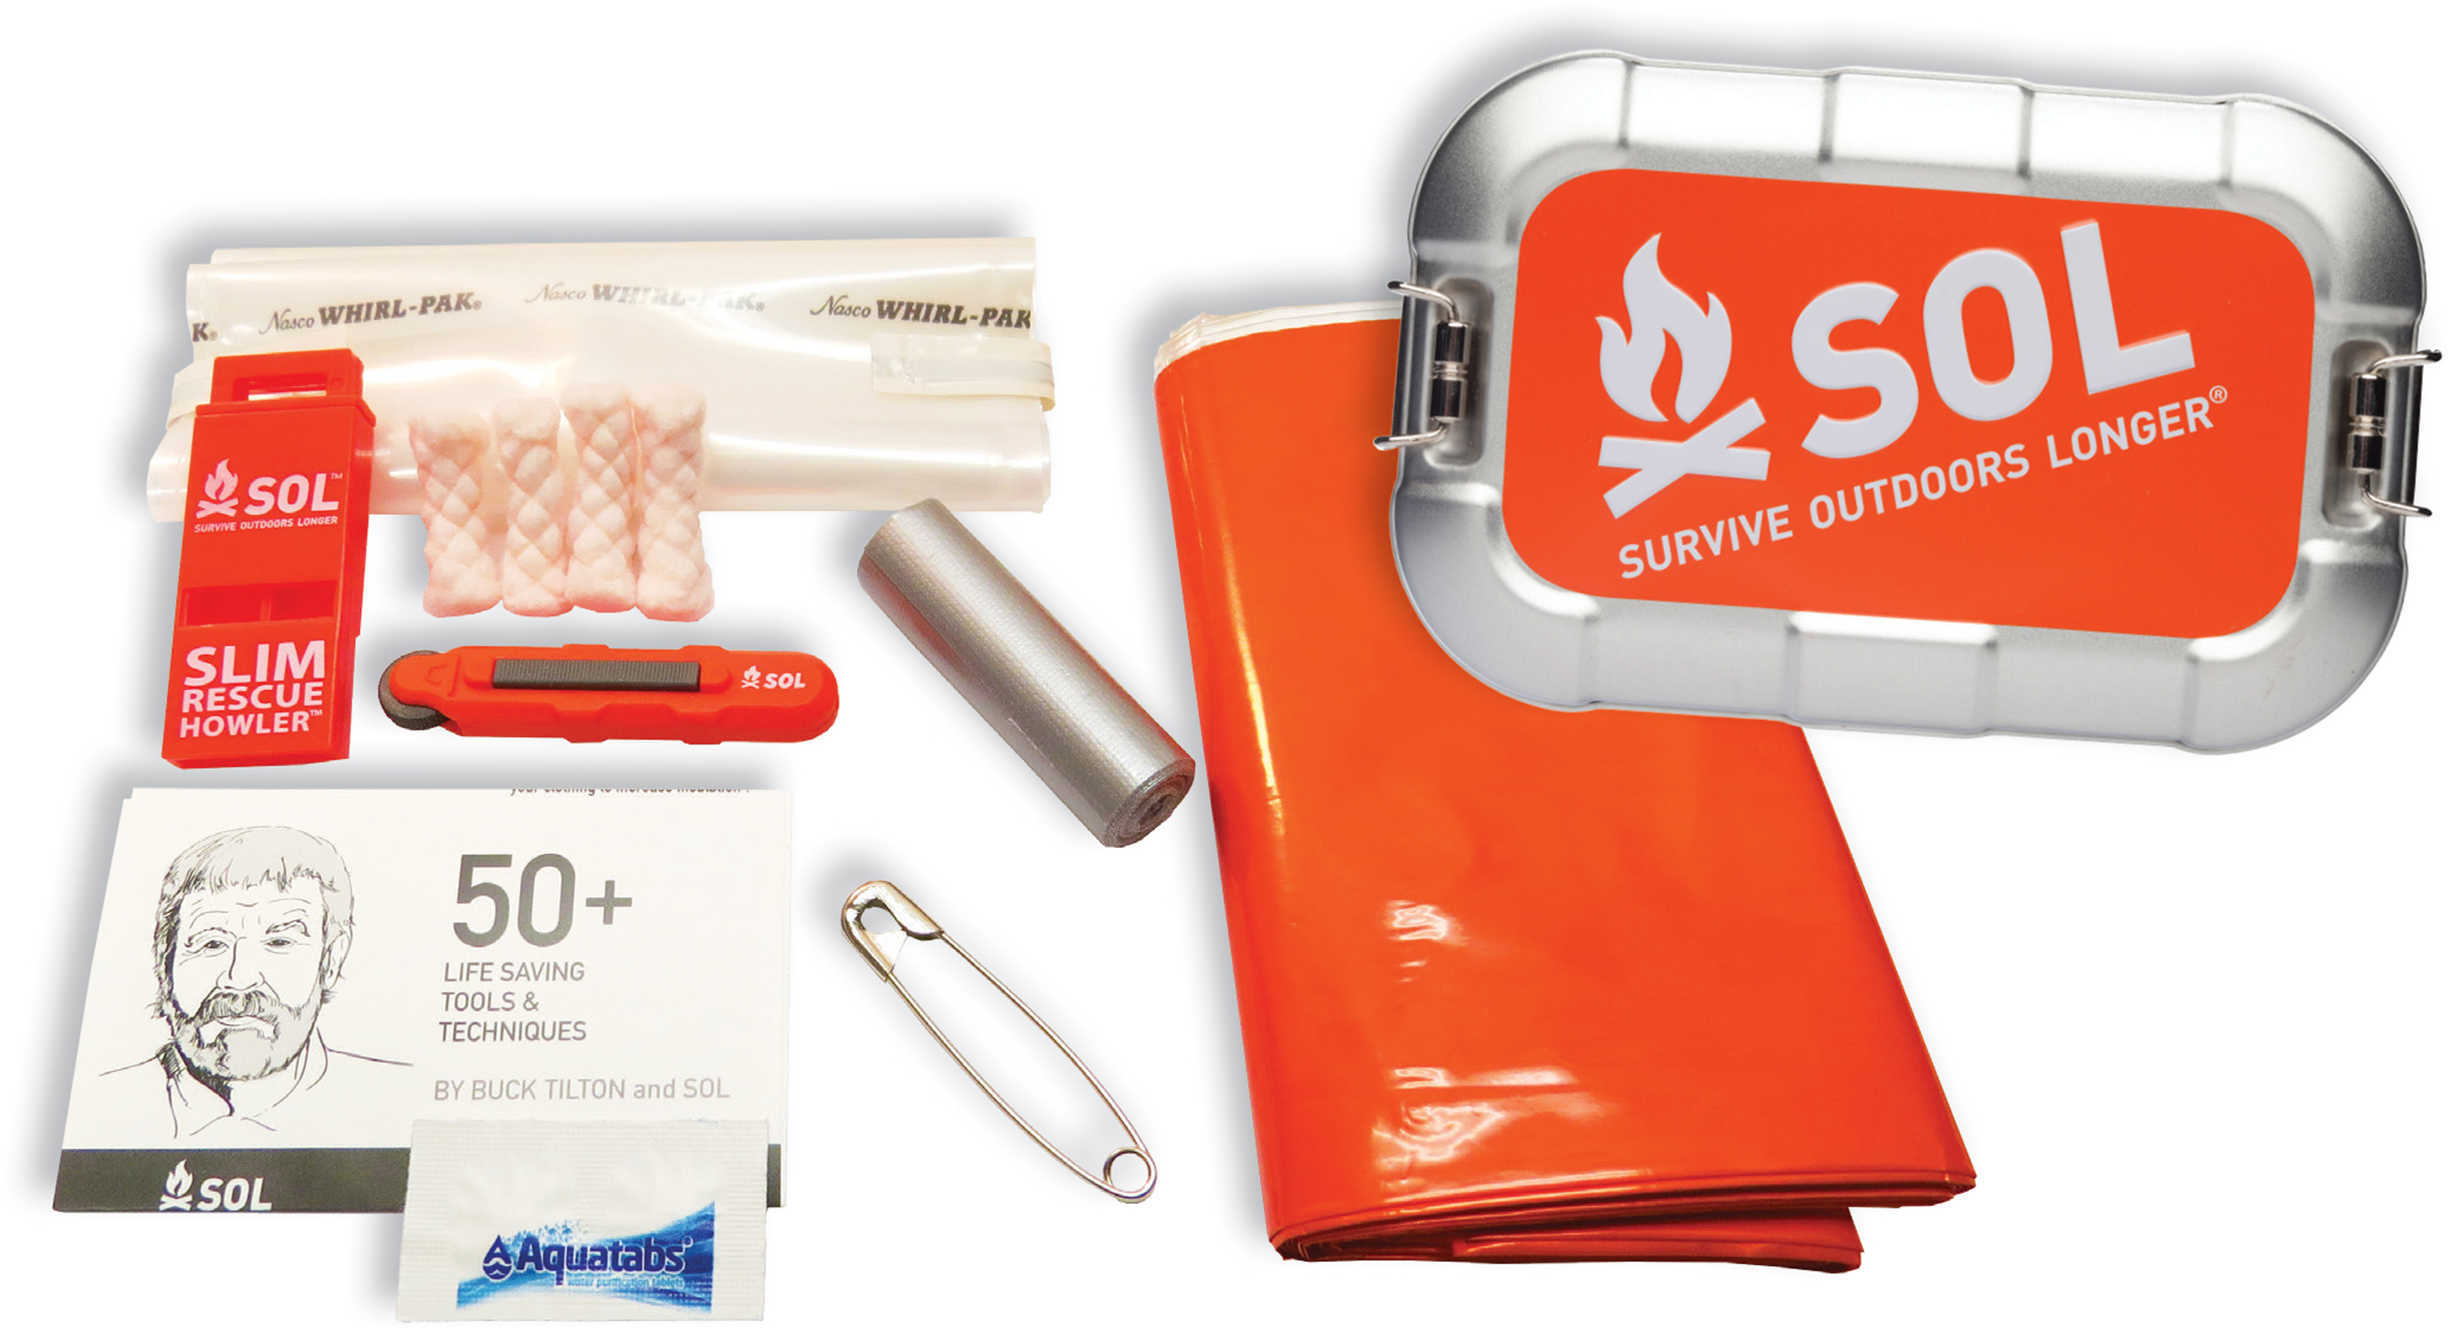 AMK Sol Traverse Survival Kit with Water PURIFICATION TABLETS